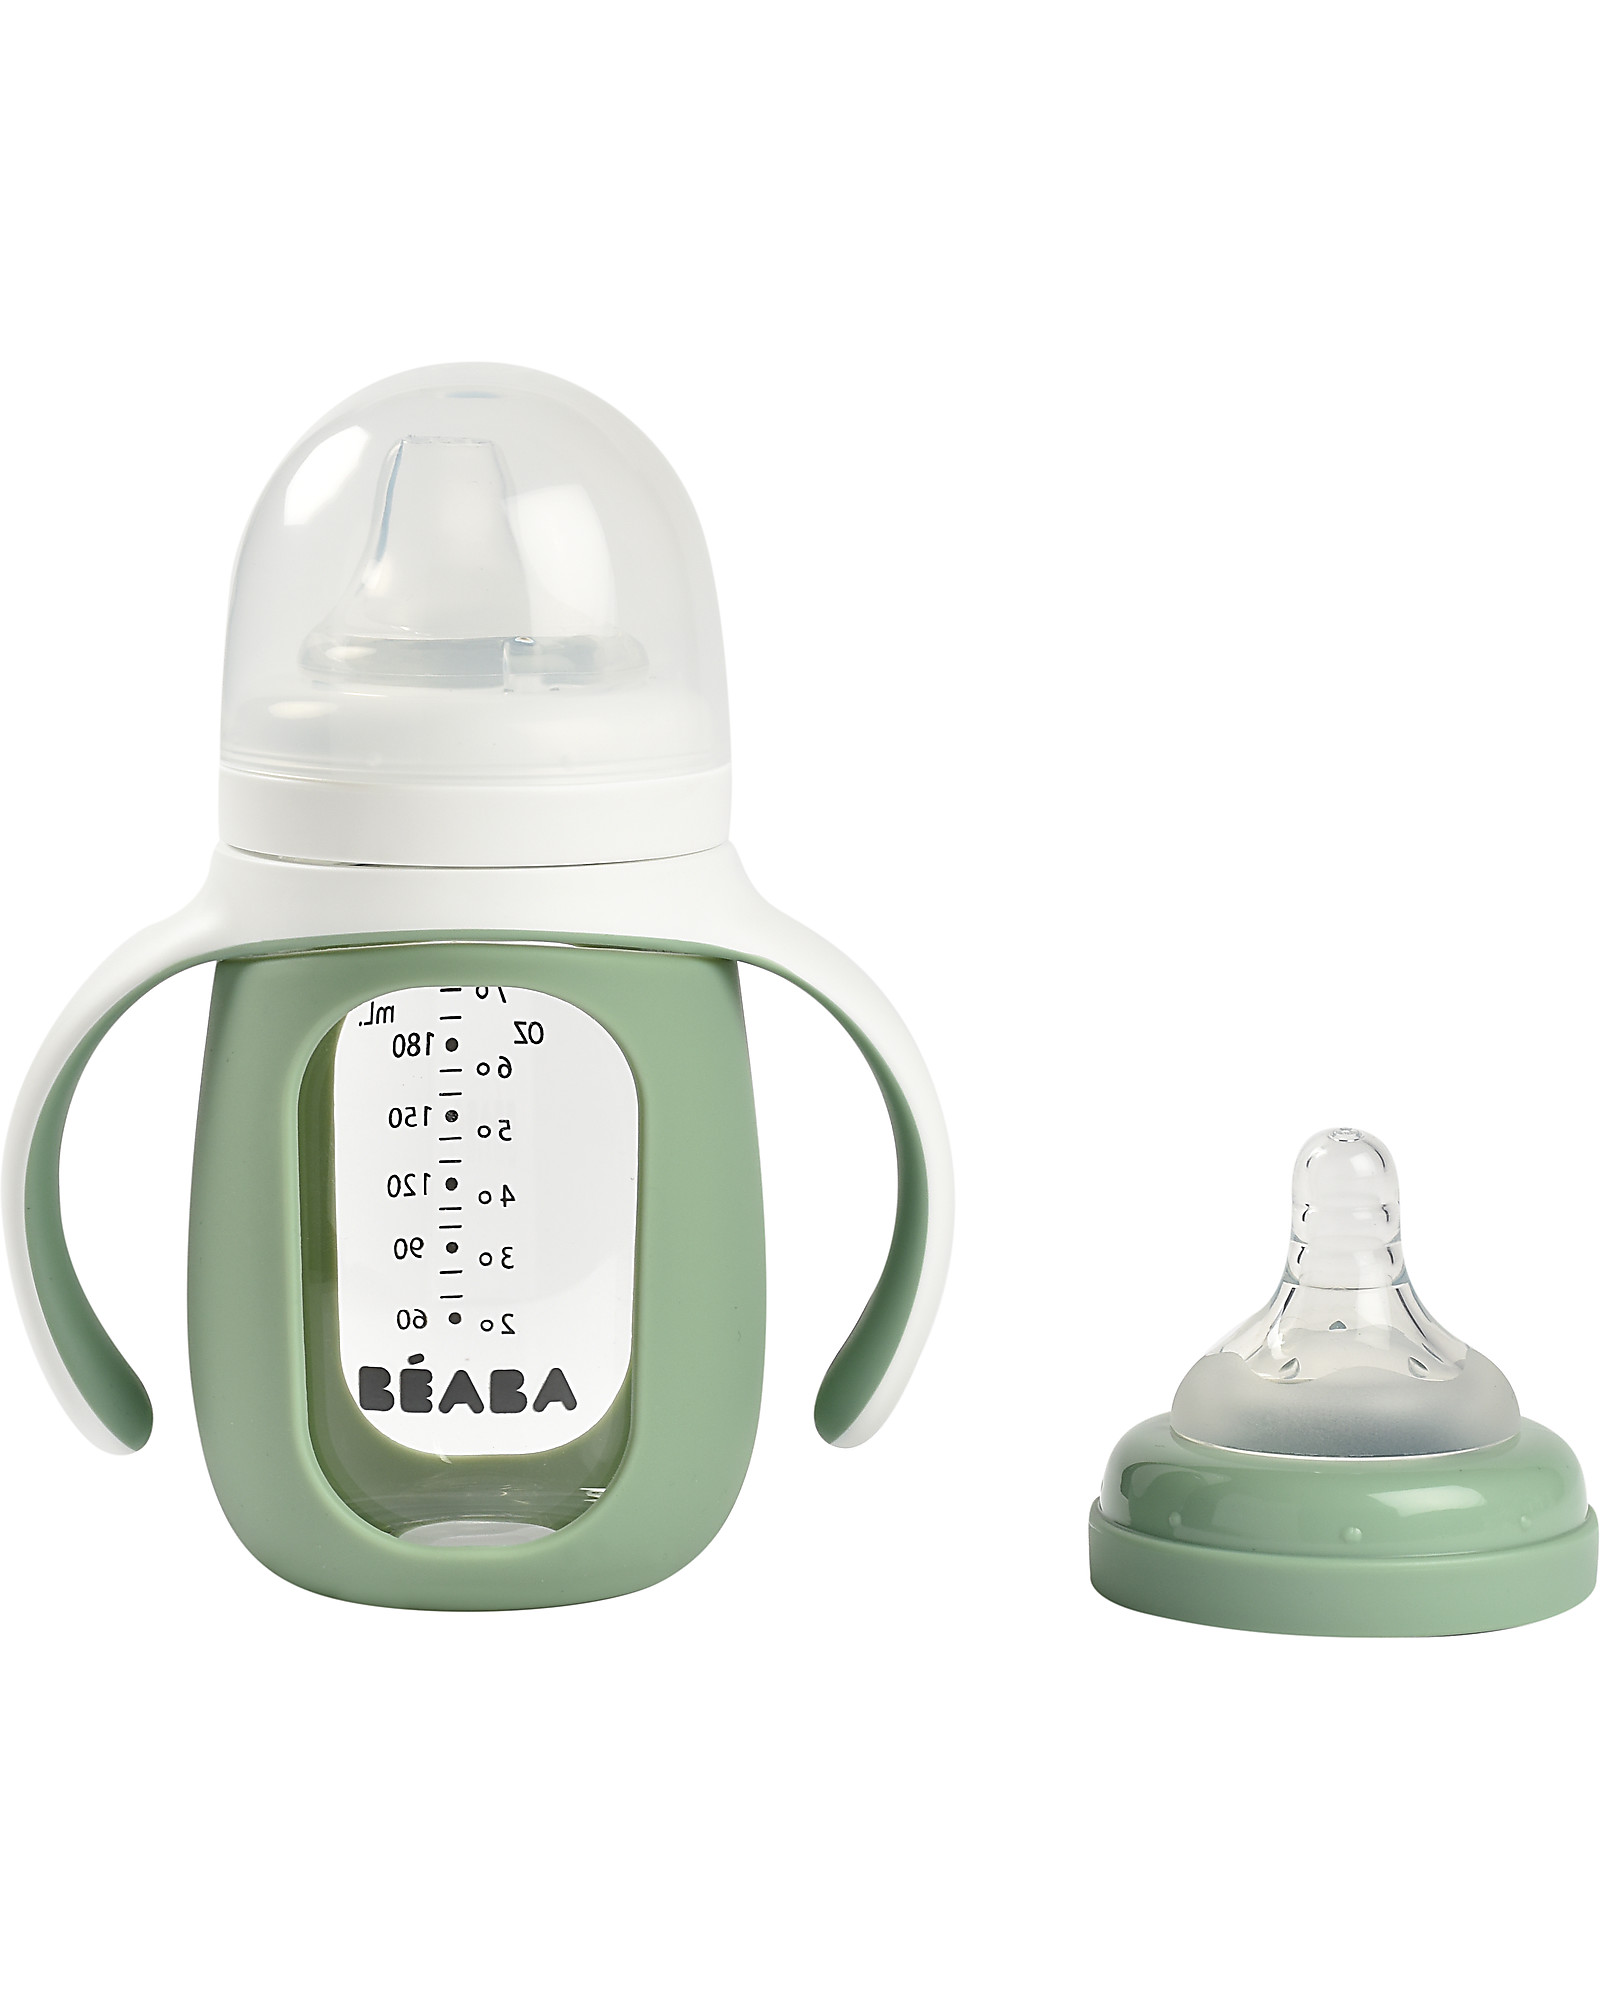 https://data.family-nation.com/imgprodotto/b%C3%A9aba-2-in-1-training-bottle-210-ml-sage-green-glass-and-silicone-encourages-little-ones-to-become-independent-baby-bottles_148542_zoom.jpg